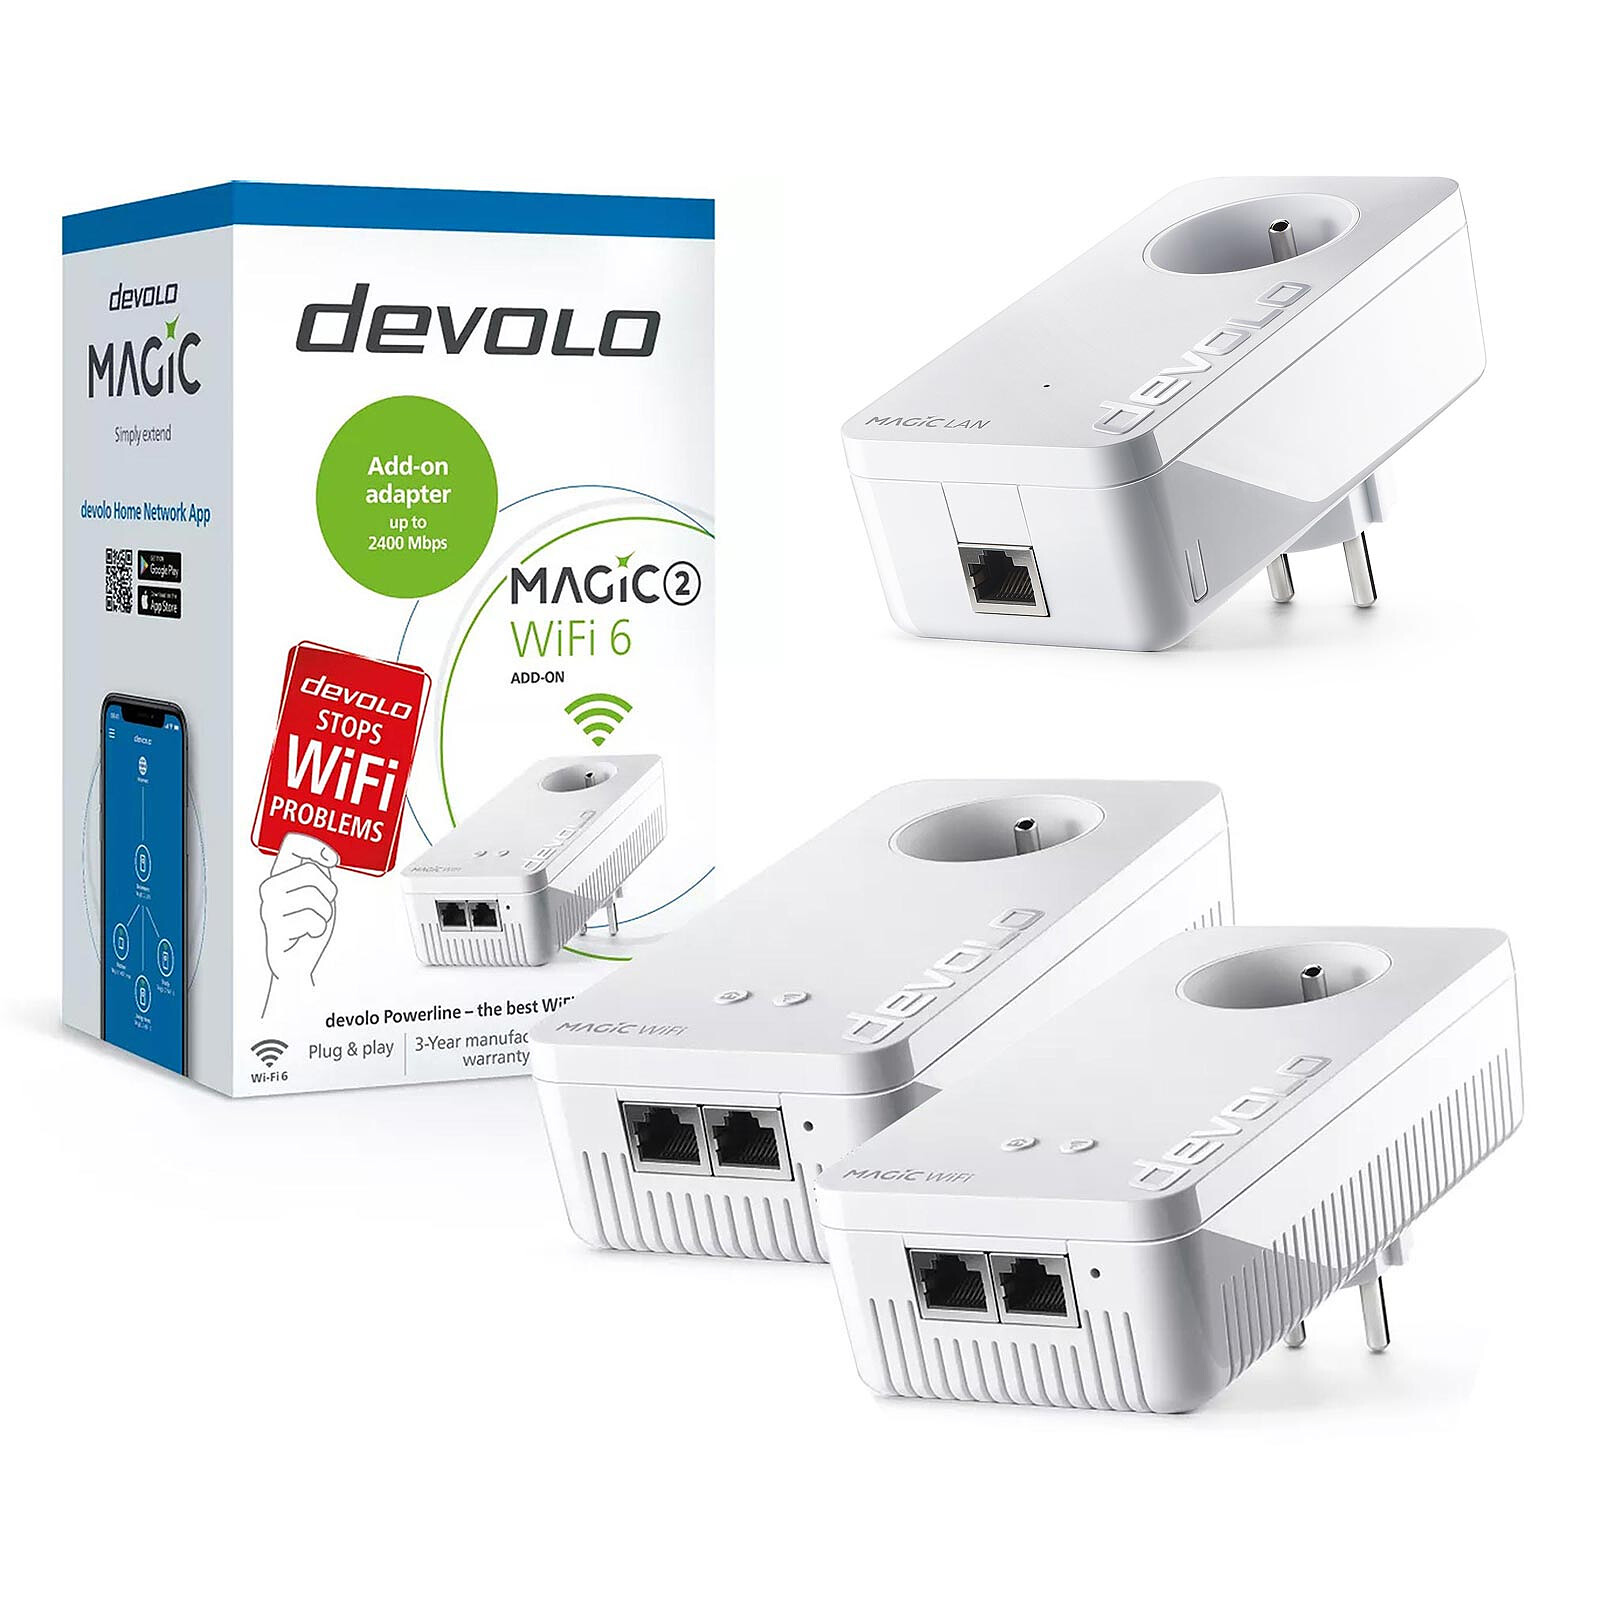 Expert review of the Devolo Magic 2 WiFi next Multi-room Kit